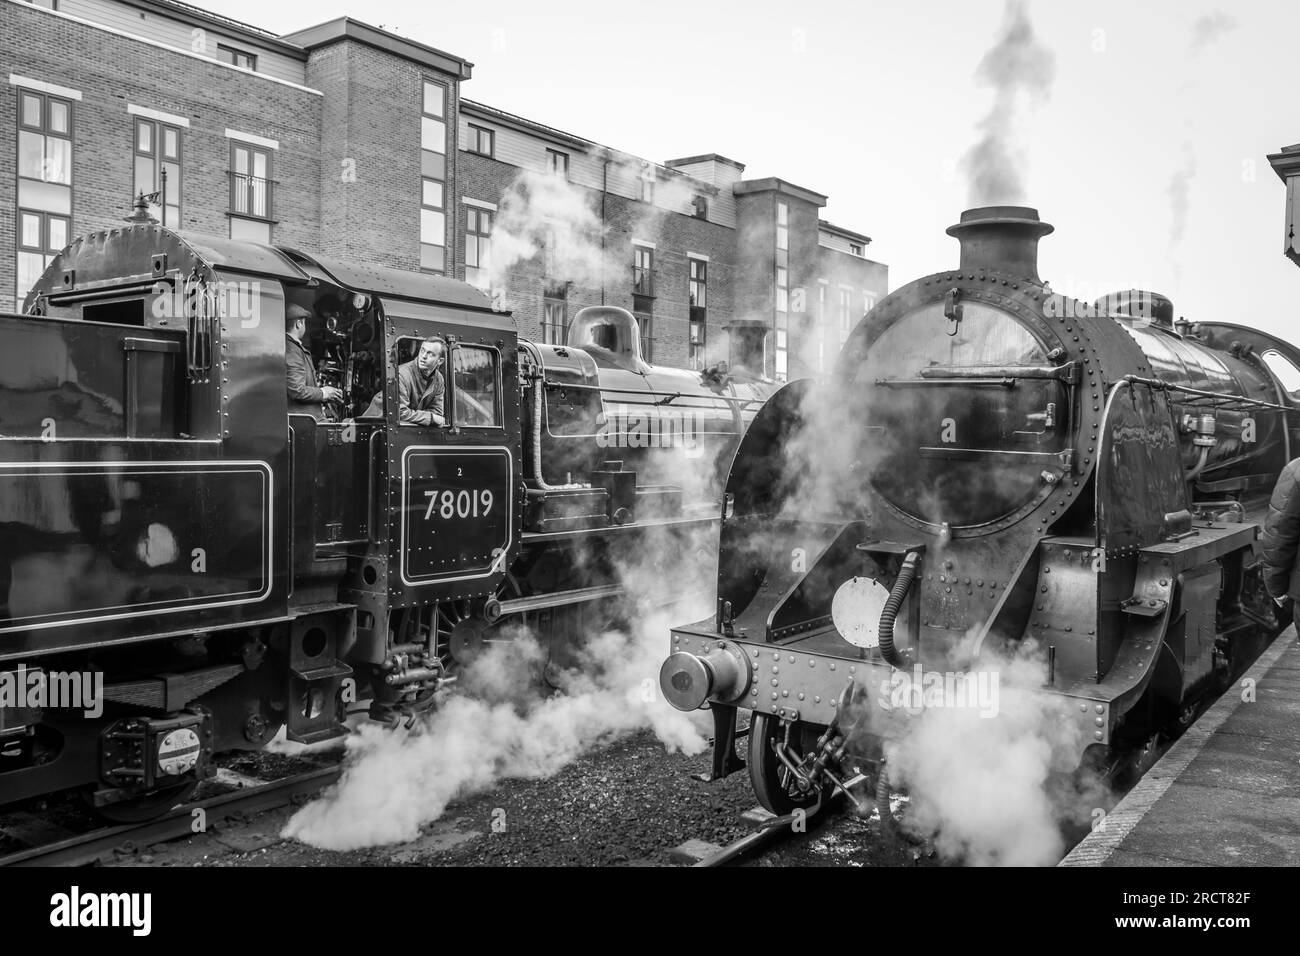 BR '2MT' 2-6-0 No. 78019 and BR 'S15' 4-6-0 No. 506, Loughborough, Great Central Railway, Leicestershire Stock Photo